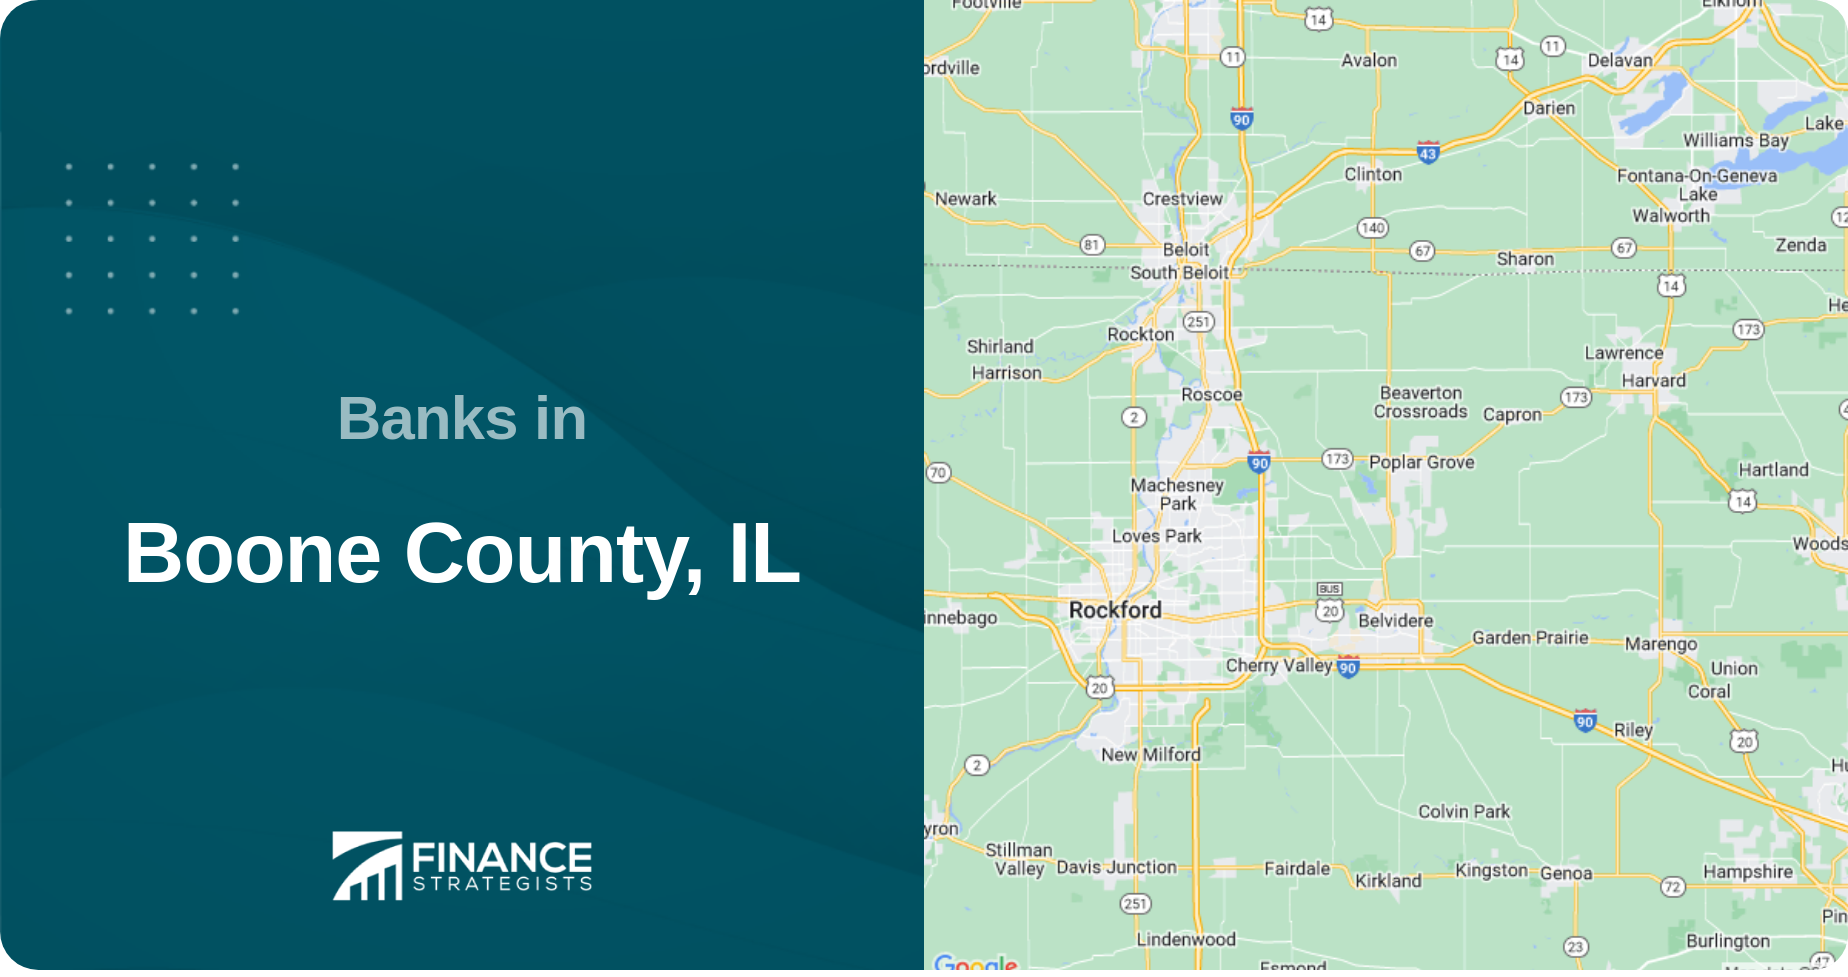 Banks in Boone County, IL